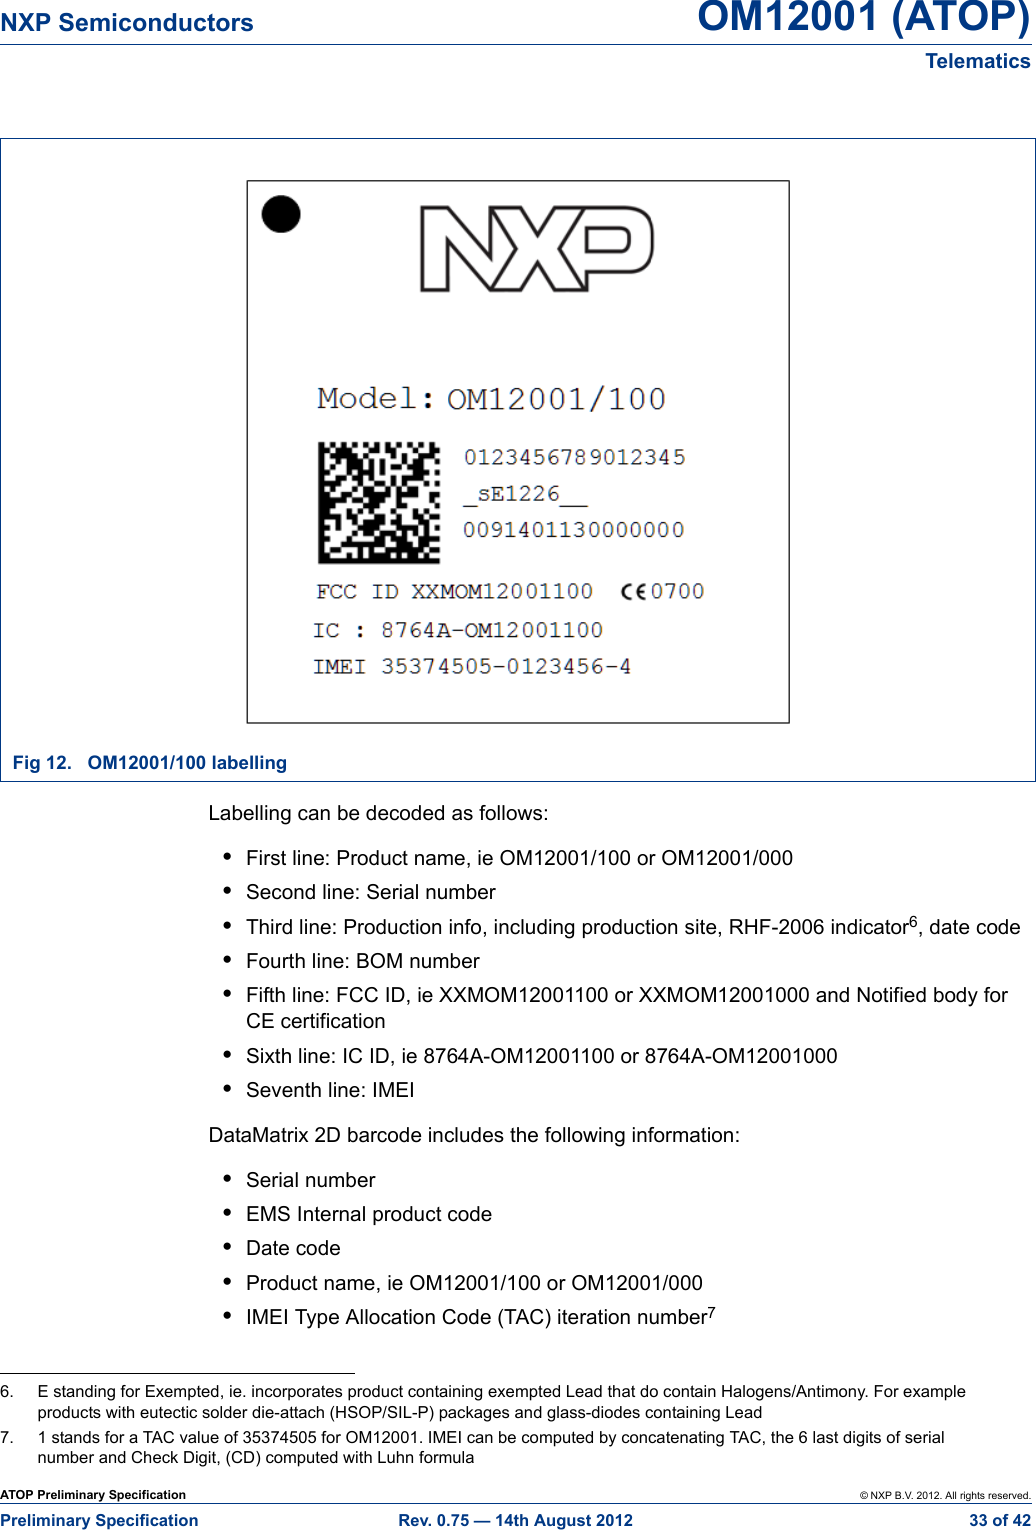 ATOP Preliminary Specification © NXP B.V. 2012. All rights reserved.Preliminary Specification Rev. 0.75 — 14th August 2012  33 of 42NXP Semiconductors OM12001 (ATOP)Telematics Labelling can be decoded as follows:•First line: Product name, ie OM12001/100 or OM12001/000•Second line: Serial number•Third line: Production info, including production site, RHF-2006 indicator6, date code•Fourth line: BOM number•Fifth line: FCC ID, ie XXMOM12001100 or XXMOM12001000 and Notified body for CE certification•Sixth line: IC ID, ie 8764A-OM12001100 or 8764A-OM12001000•Seventh line: IMEIDataMatrix 2D barcode includes the following information:•Serial number•EMS Internal product code•Date code•Product name, ie OM12001/100 or OM12001/000•IMEI Type Allocation Code (TAC) iteration number7Fig 12. OM12001/100 labelling6. E standing for Exempted, ie. incorporates product containing exempted Lead that do contain Halogens/Antimony. For example products with eutectic solder die-attach (HSOP/SIL-P) packages and glass-diodes containing Lead7. 1 stands for a TAC value of 35374505 for OM12001. IMEI can be computed by concatenating TAC, the 6 last digits of serial number and Check Digit, (CD) computed with Luhn formula